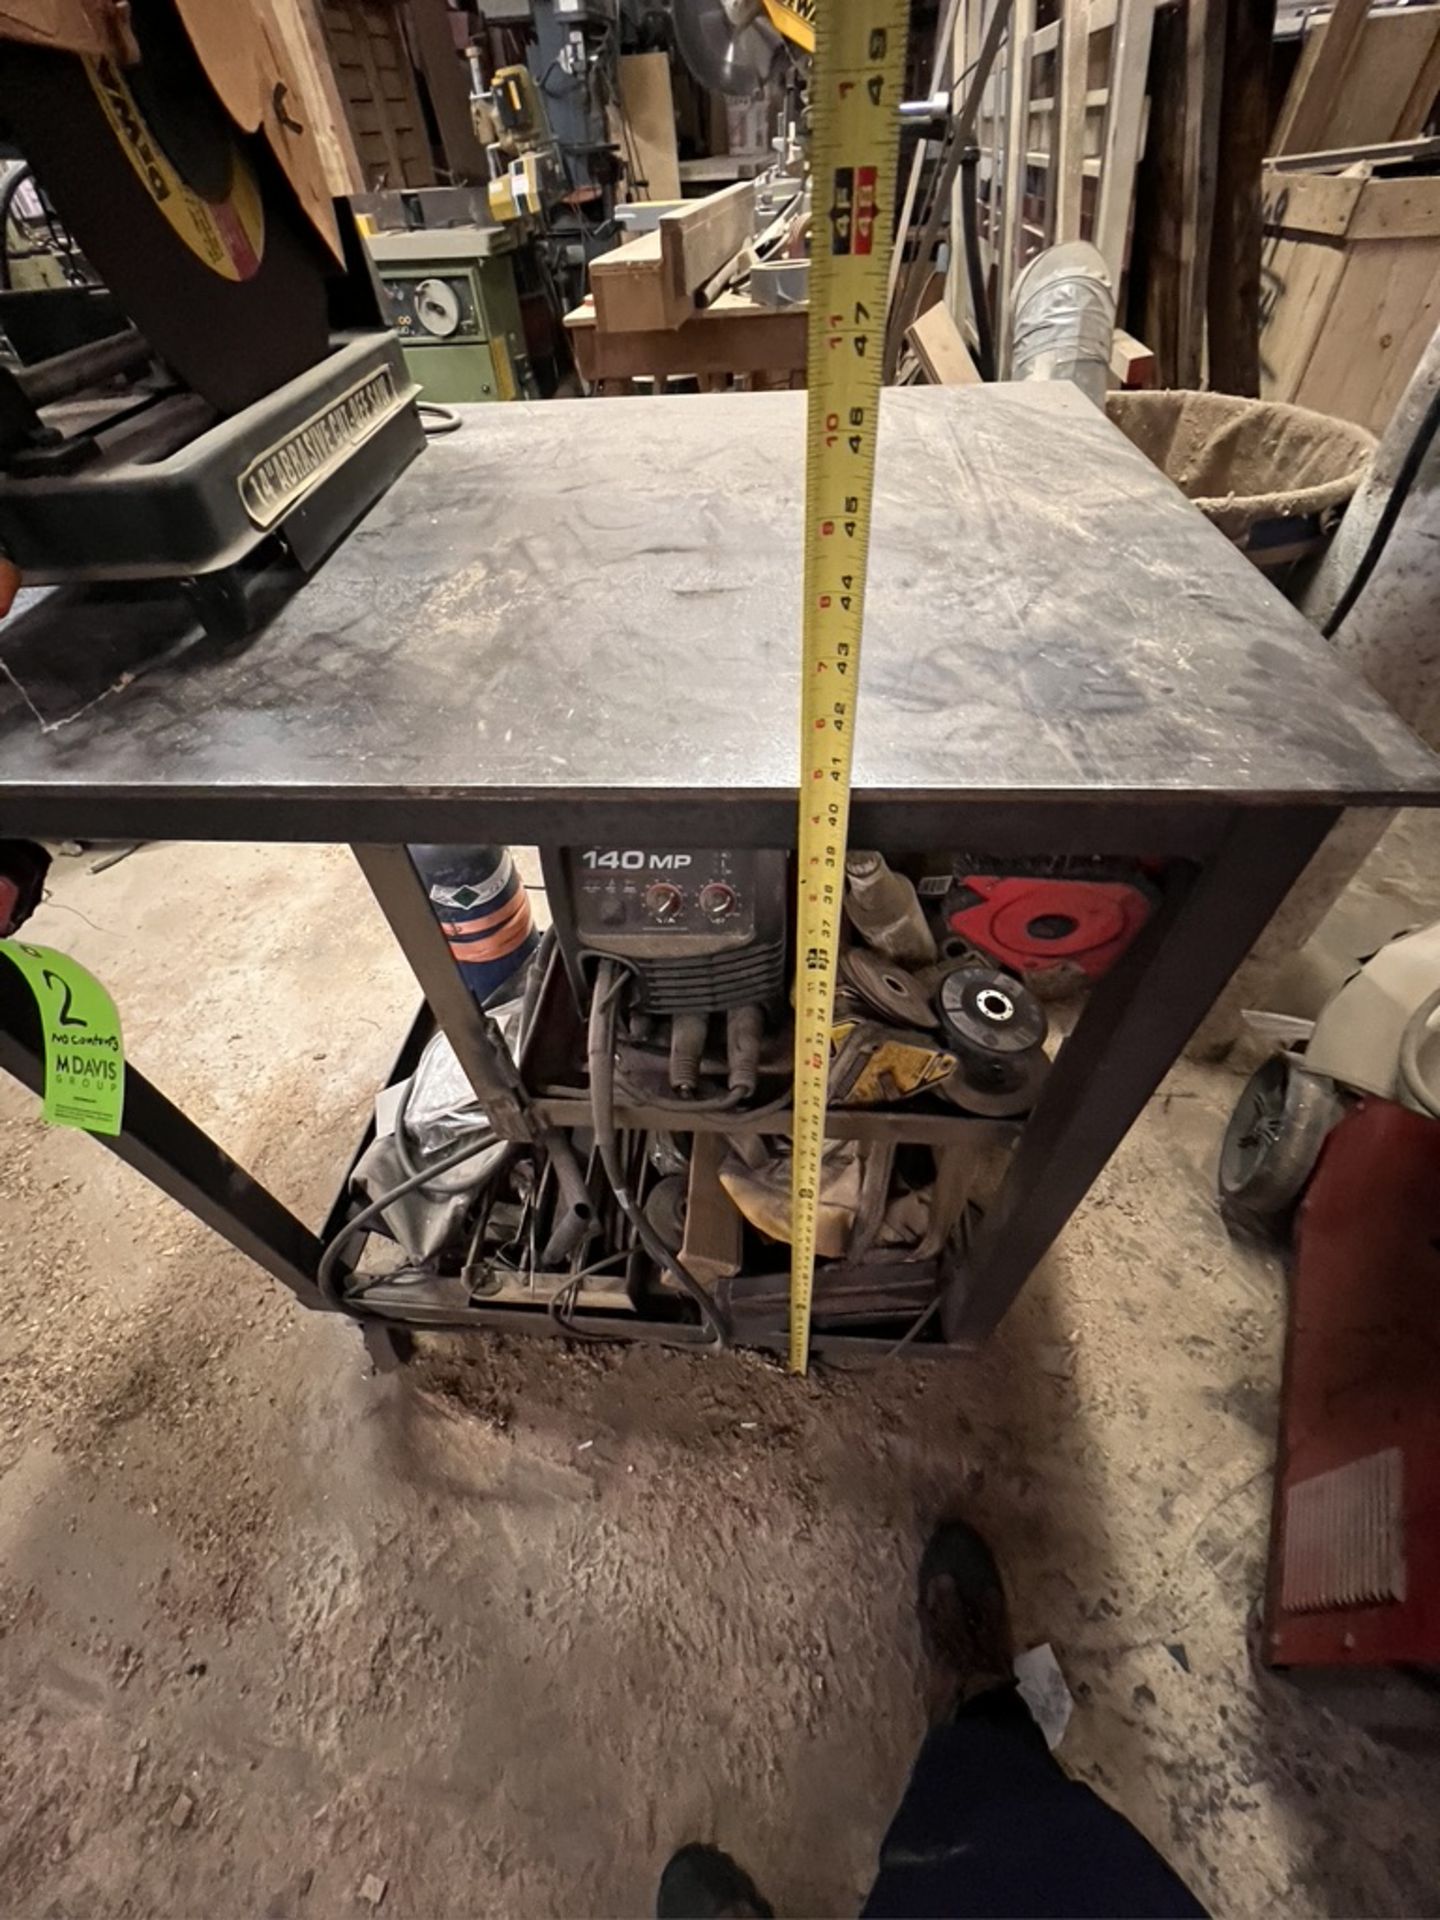 WELDING TABLE APPROX. 39" L X 30" W X 40" H  (DOES NOT INCLUDE CONTENTS)